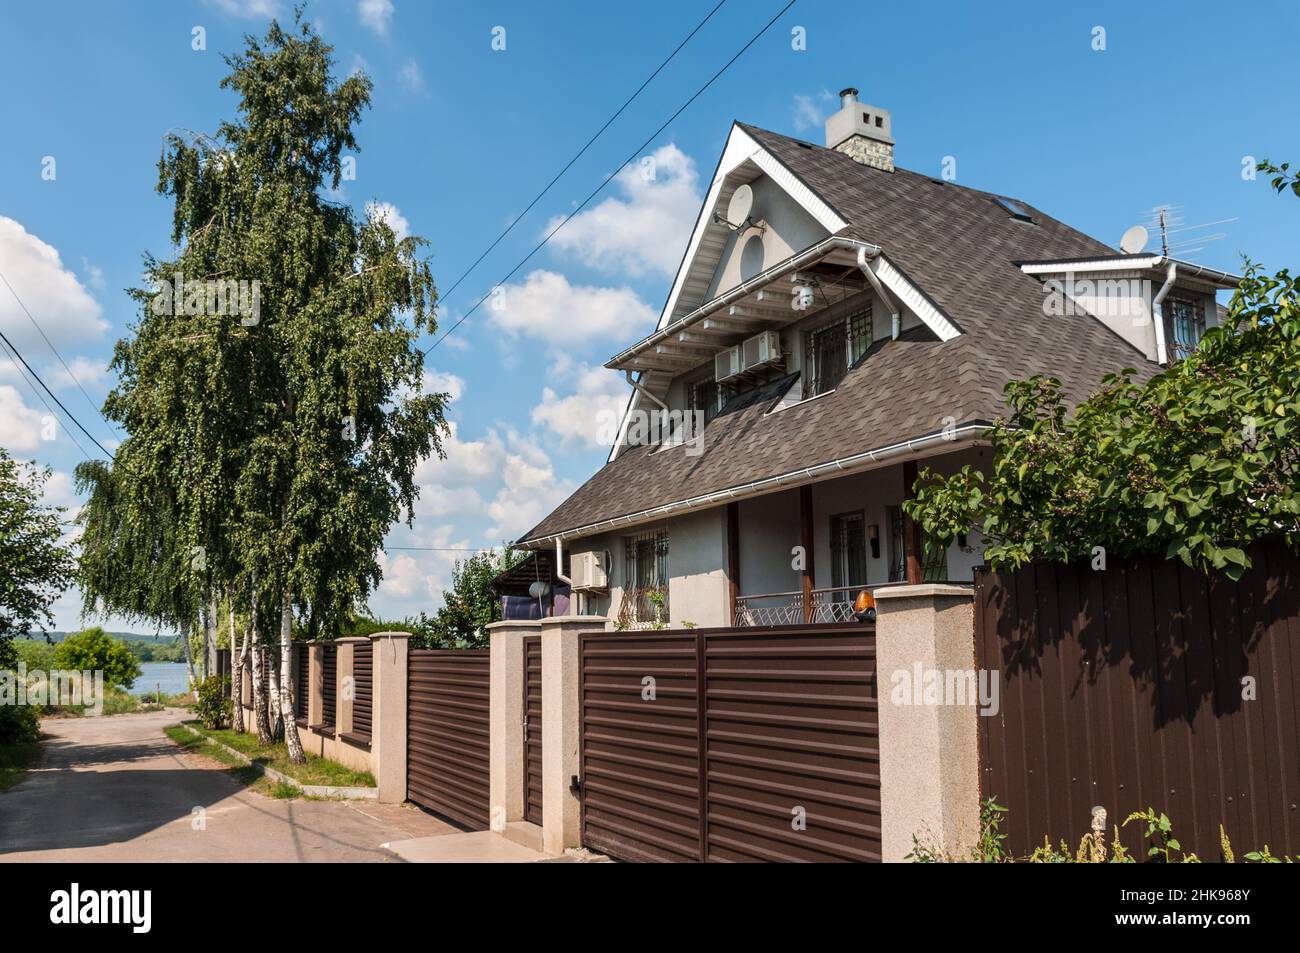 Kyiv, Ukraine - July 3, 2021: Typical cottage or mansion on the banks of the Dnipro river in the Osokorky area. Osokorky is a historical neighbourhood Stock Photo